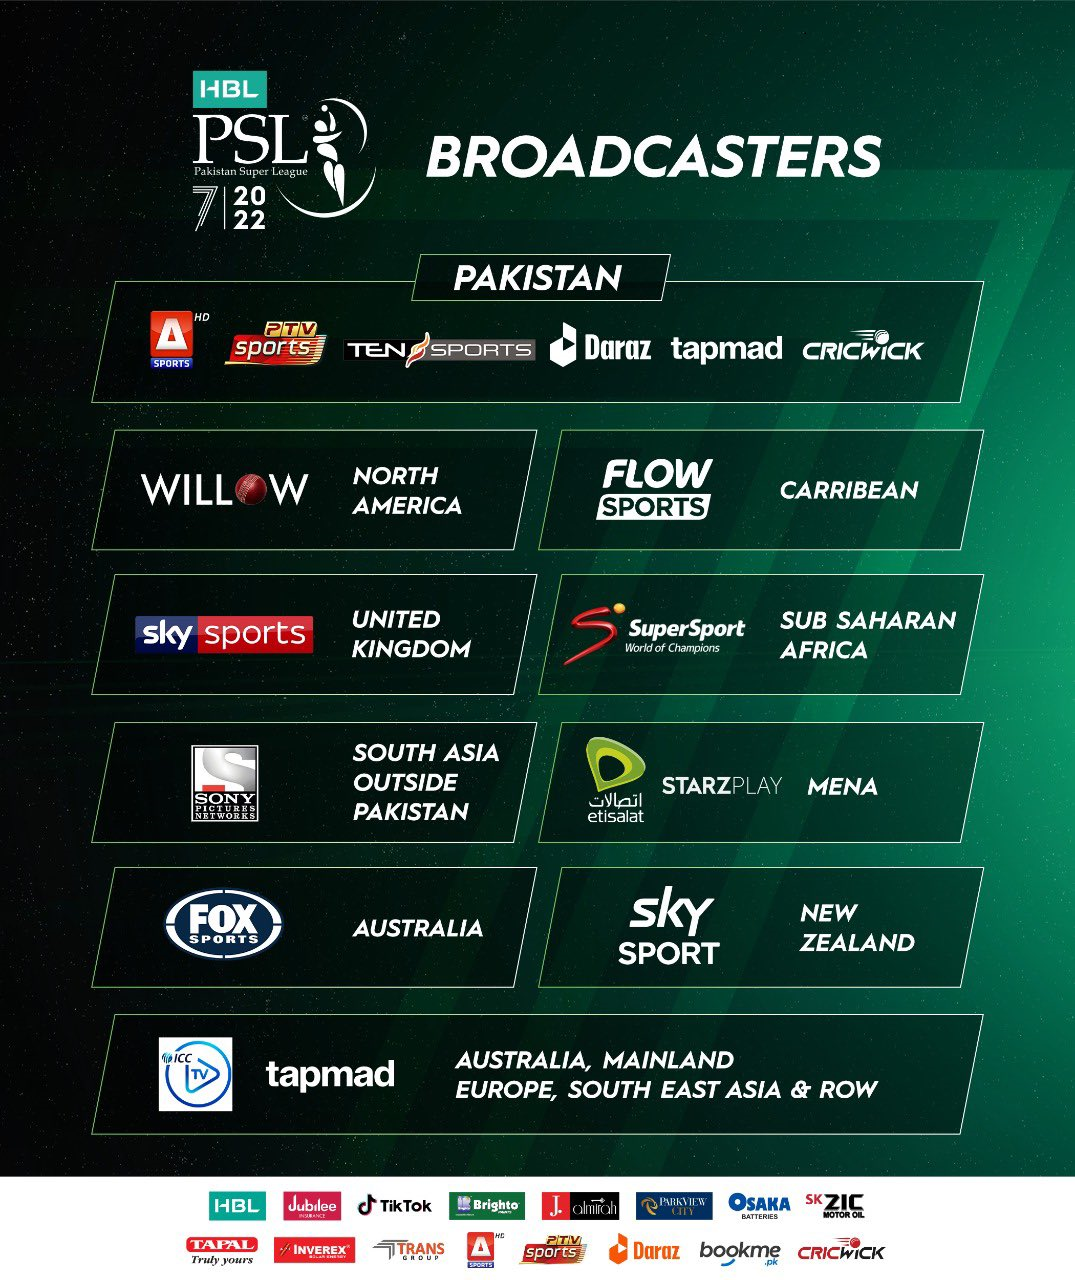 Complete list of HBL PSL 7 broadcasters